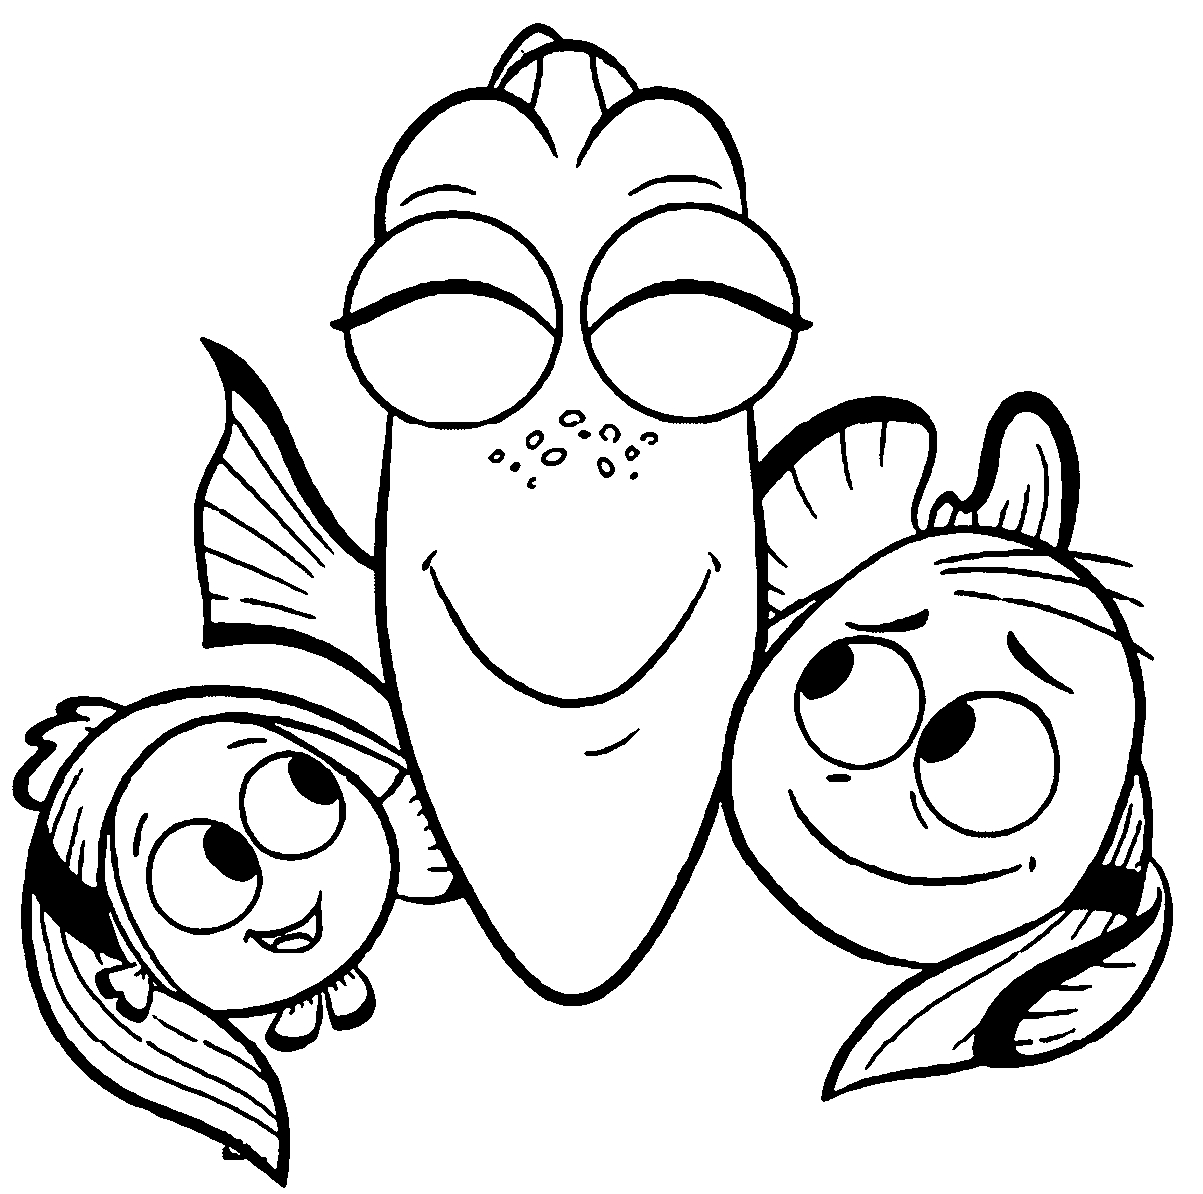 Download Dory Coloring Pages - Best Coloring Pages For Kids